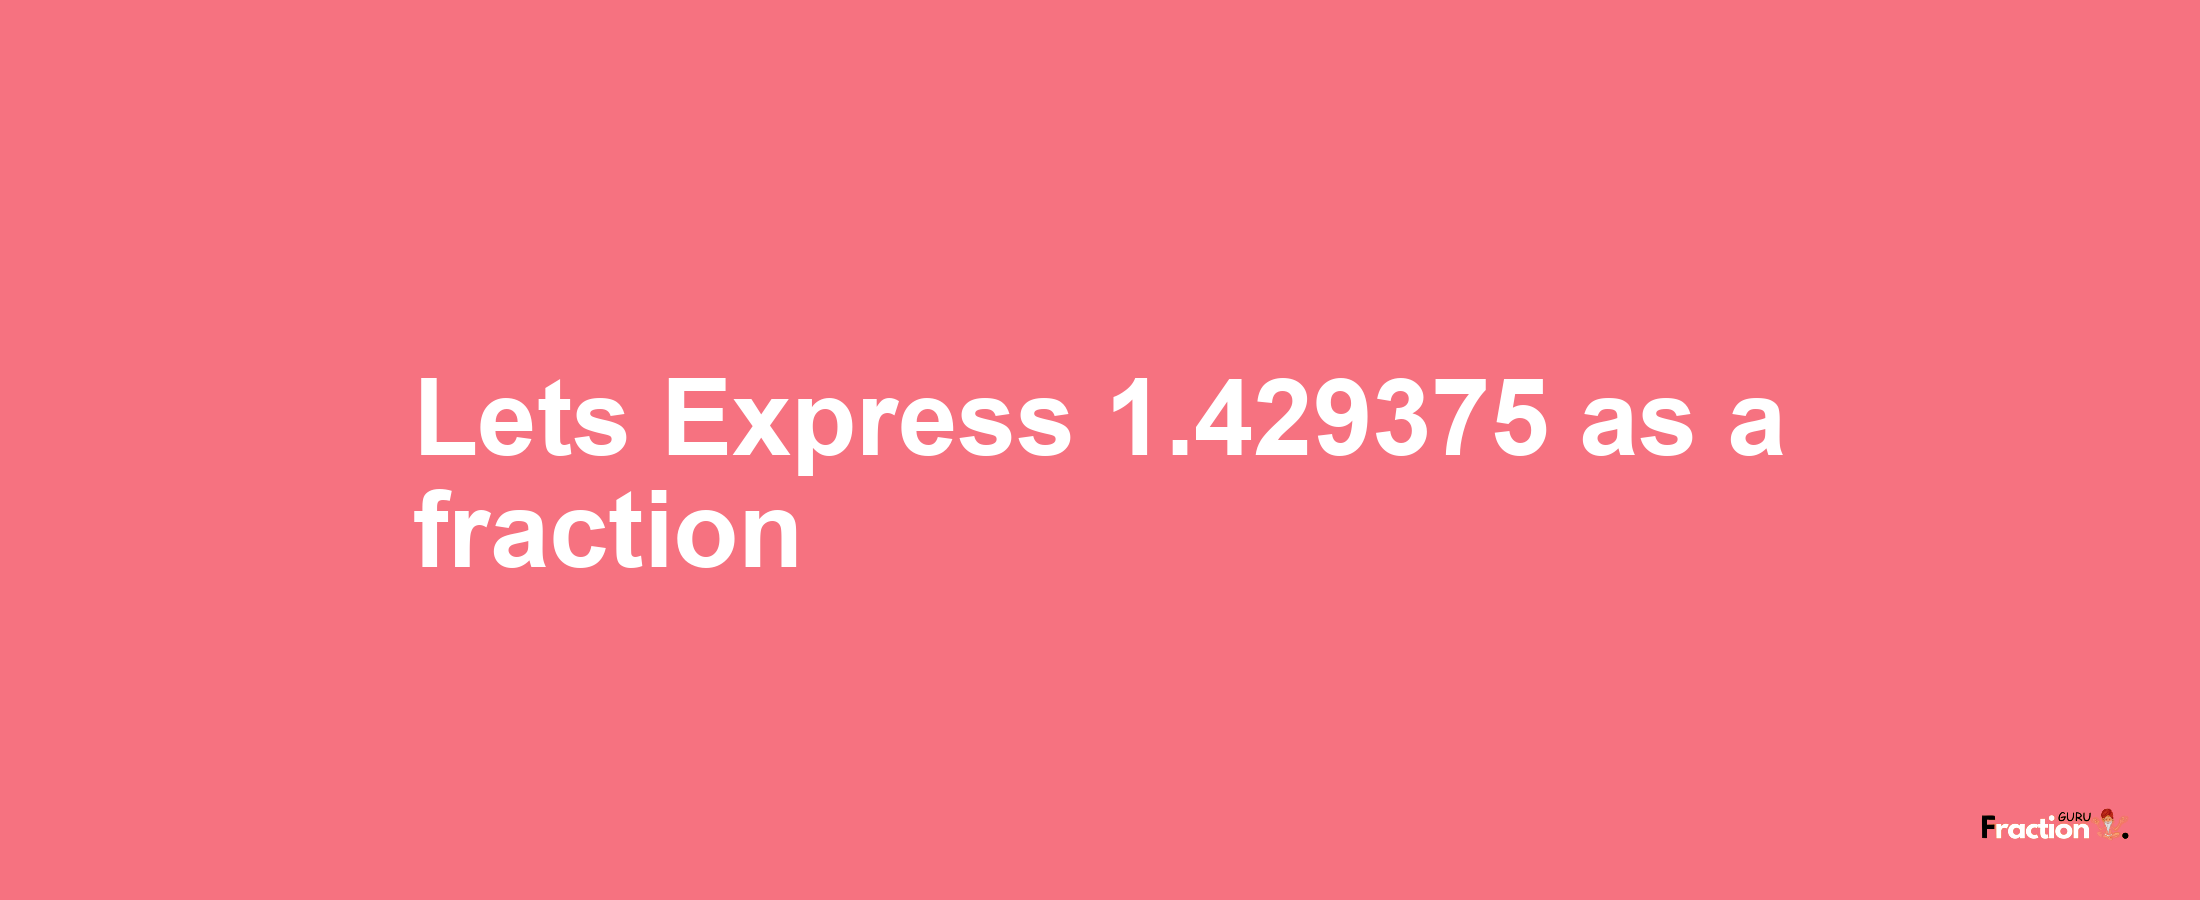 Lets Express 1.429375 as afraction